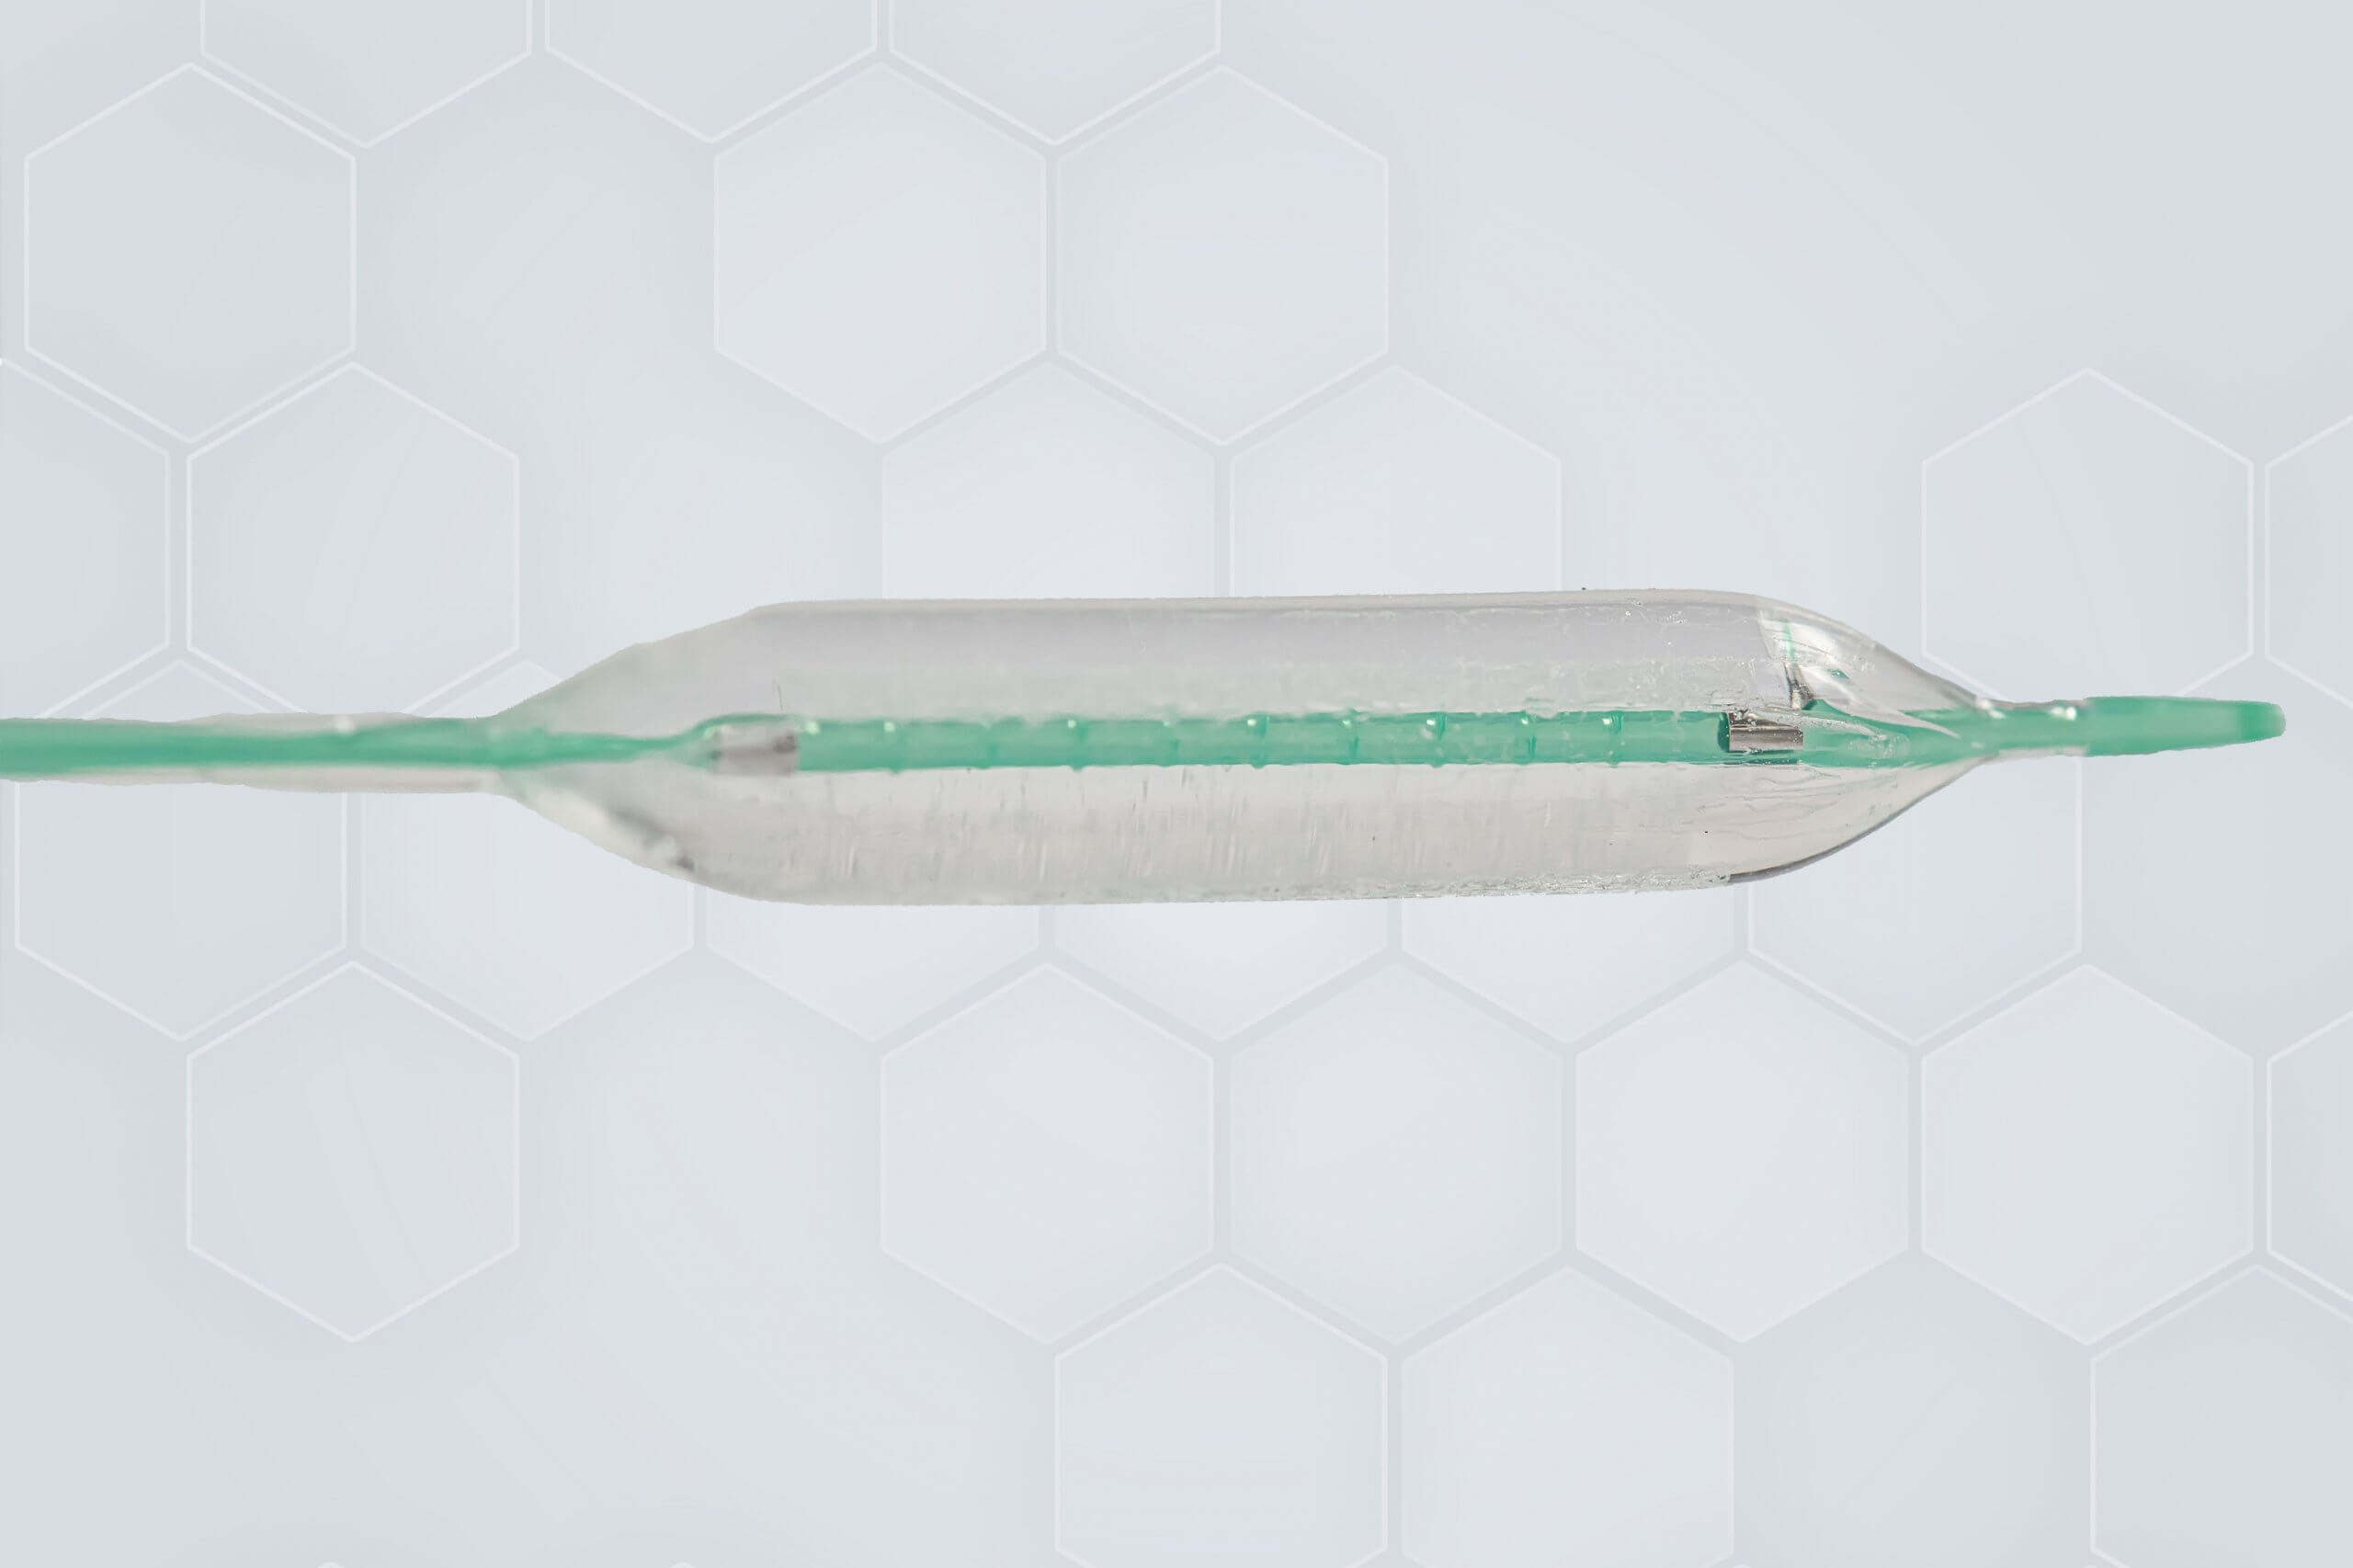 Stent and balloon catheter